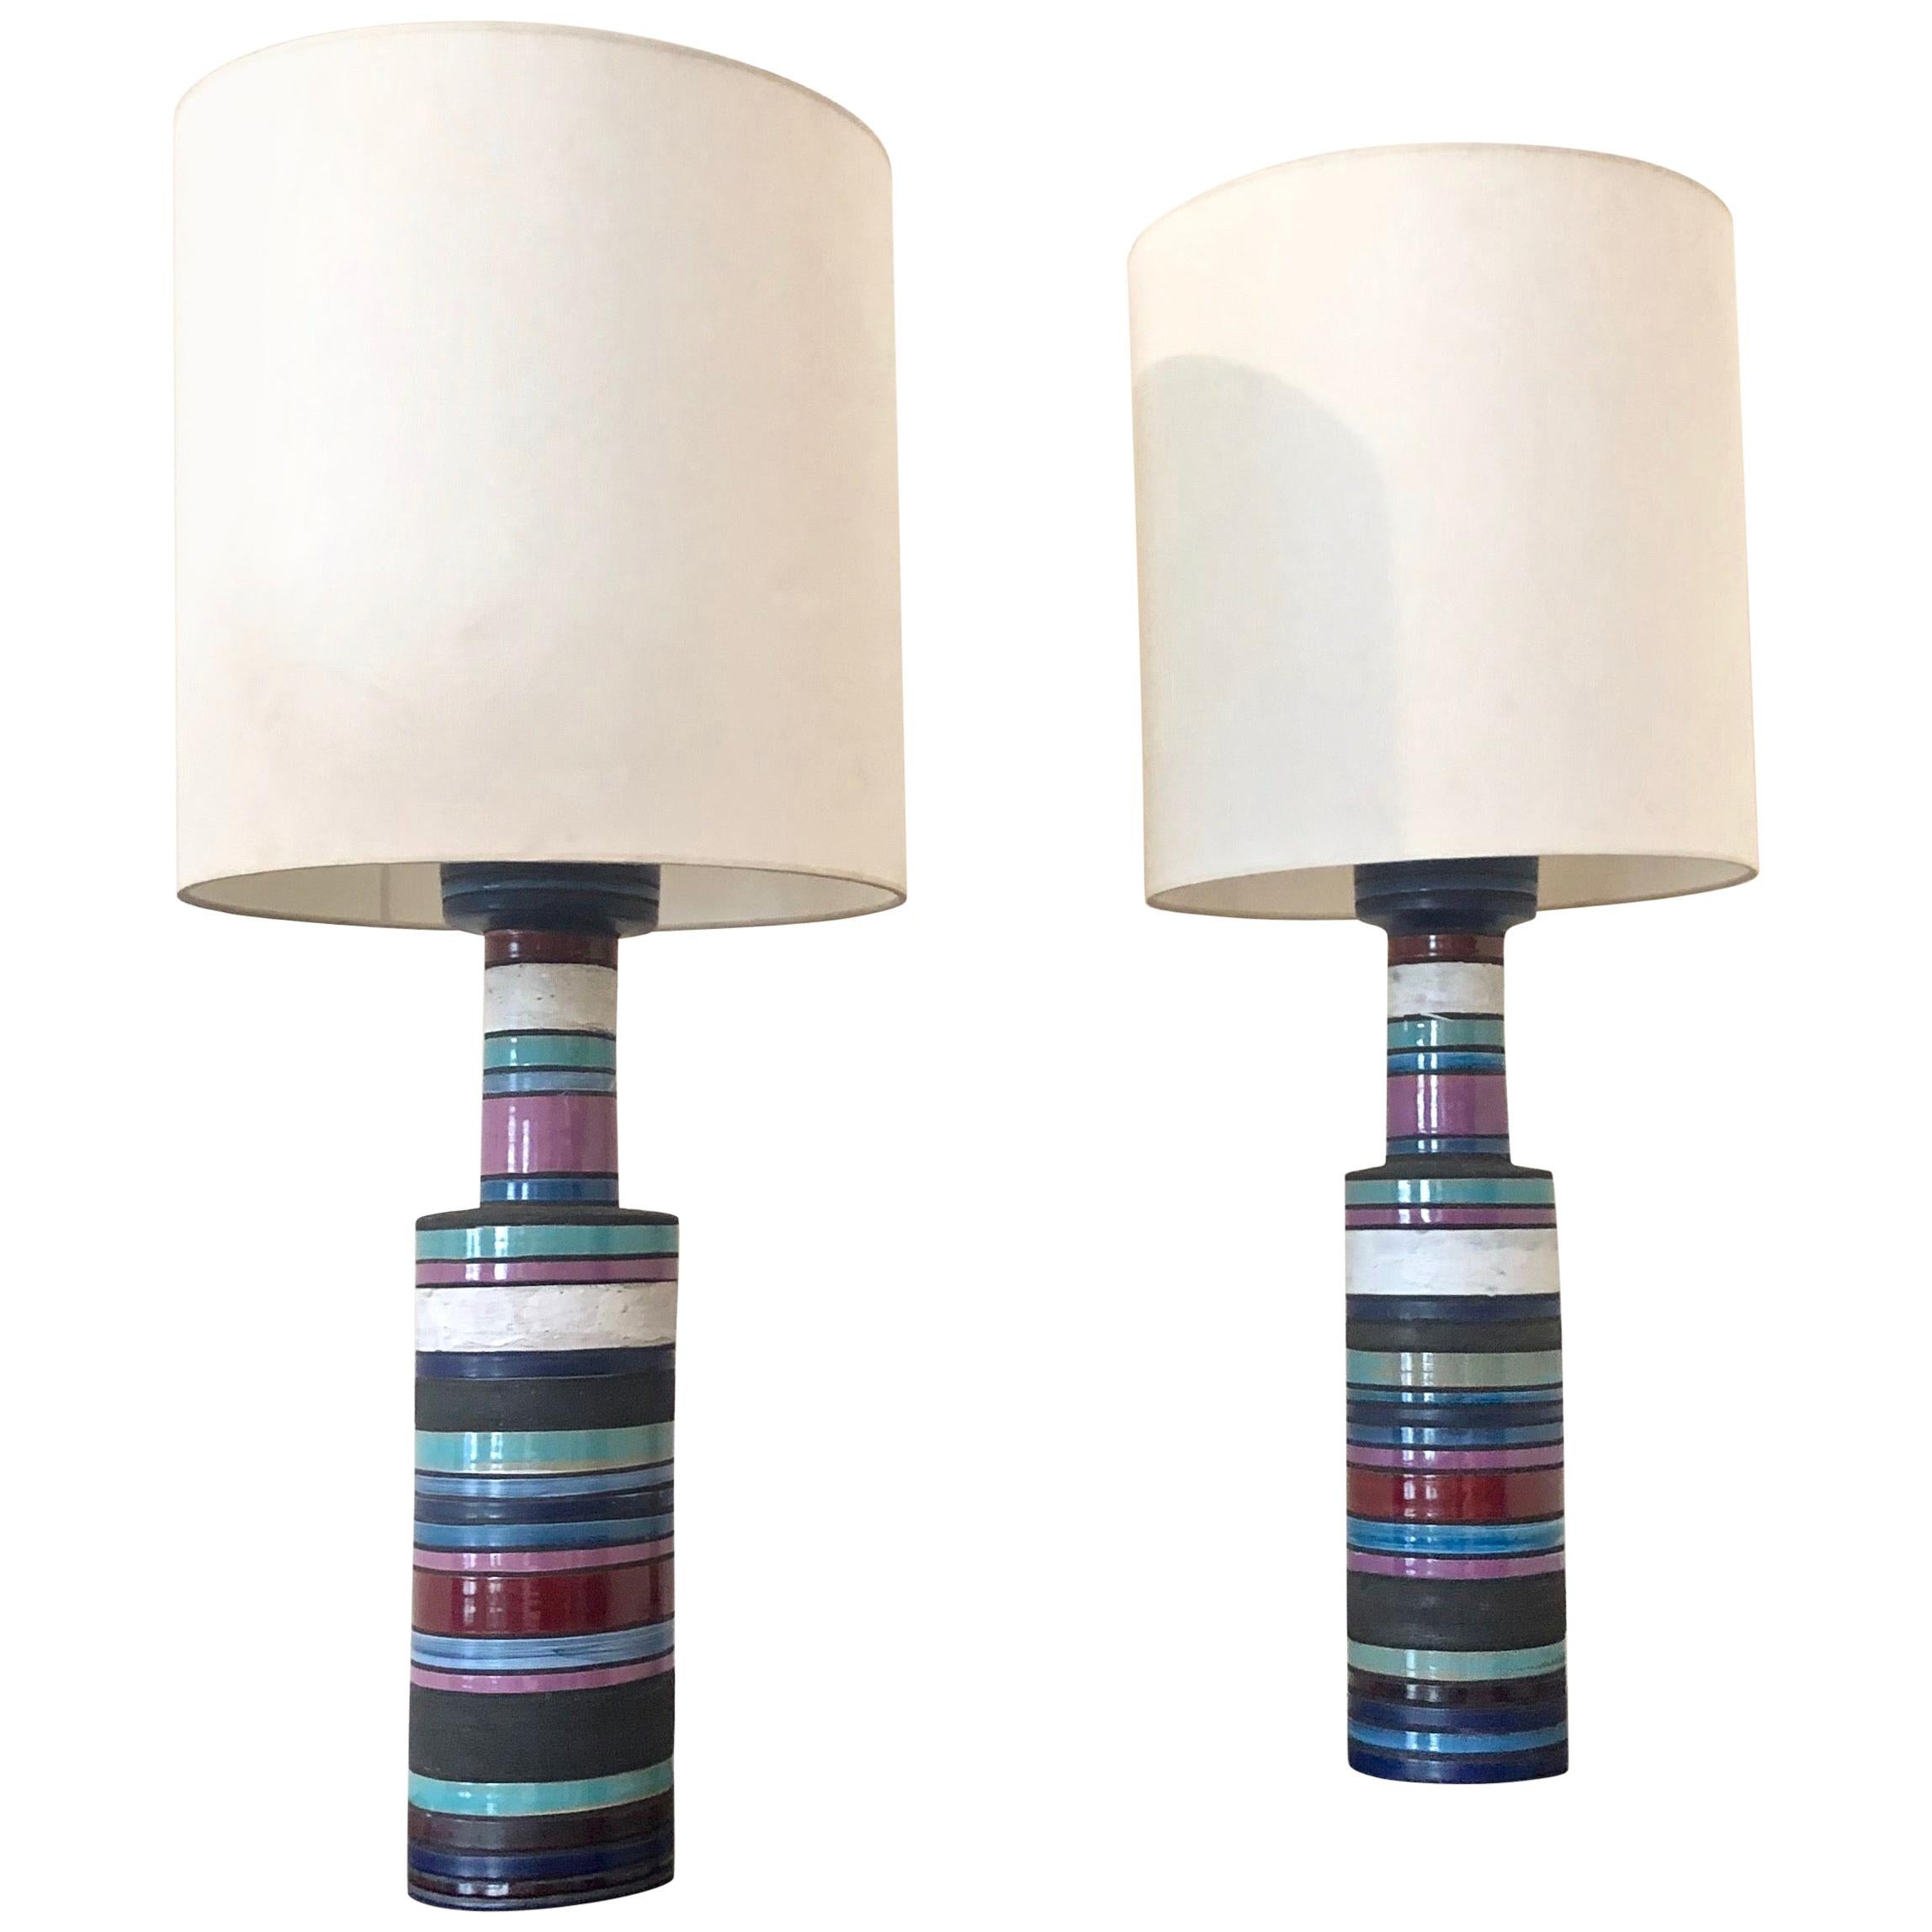 Pair of "Cambogia" Table Lamps by Aldo Londi for Bitossi, Raymor, Italy, 1950s For Sale